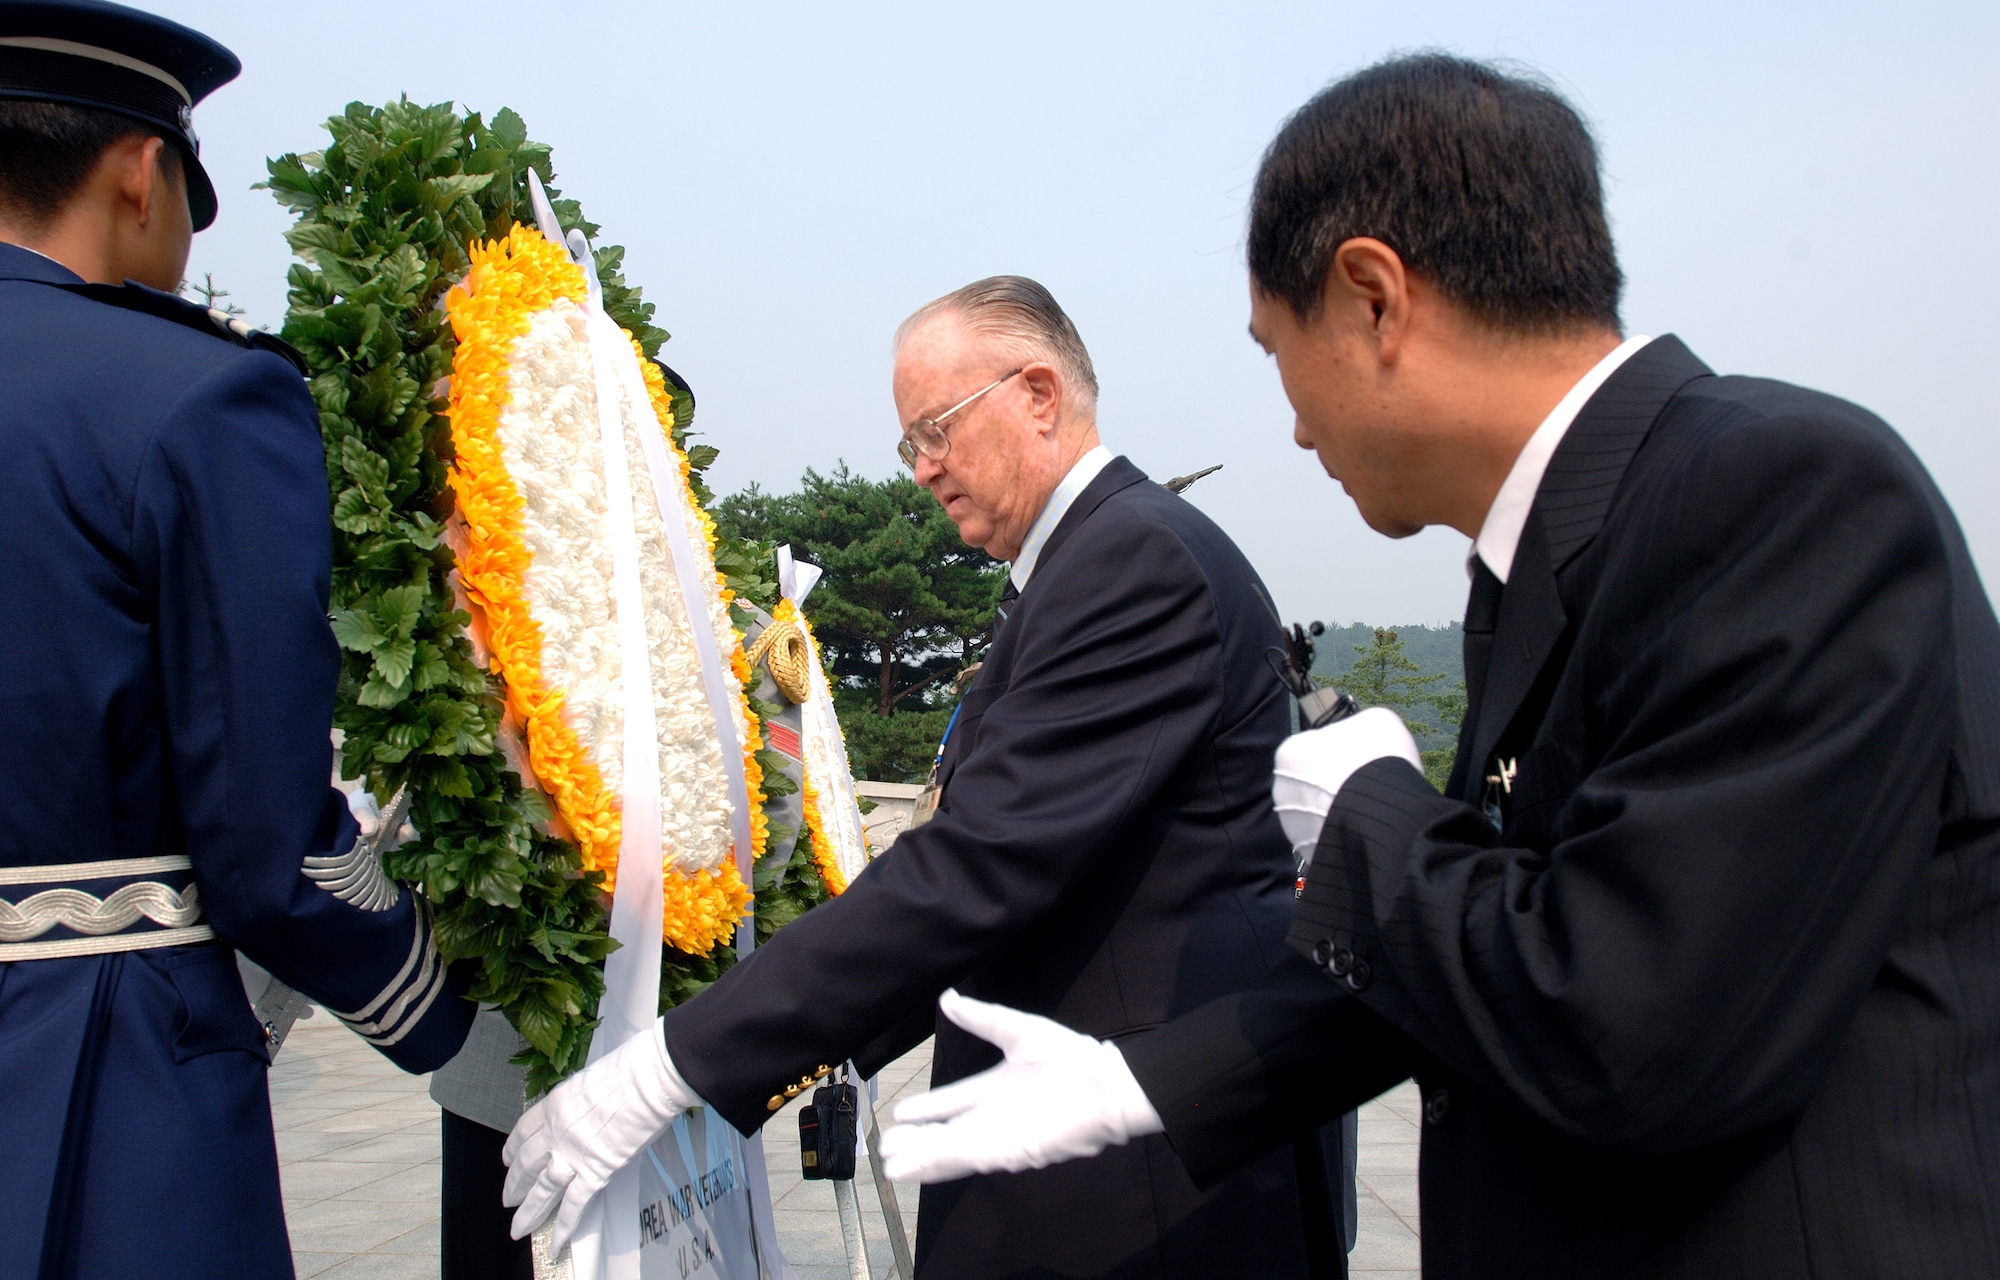 Retired Maj. Gen. Carl G. Schneider places a wreath before a Korean War Monument during a ceremony at the South Korean National Cemetery along with fellow Korean War veterans Sept. 12. The South Korean government's Revisit Korea program invites war veterans each year to come to South Korea to honor the men and woman from 21 countries who served during the Korean War. Nearly 25,000 veterans have participated in this program since 1975. (U.S. Air Force photo/Staff Sgt. Bennie J. Davis III) 
